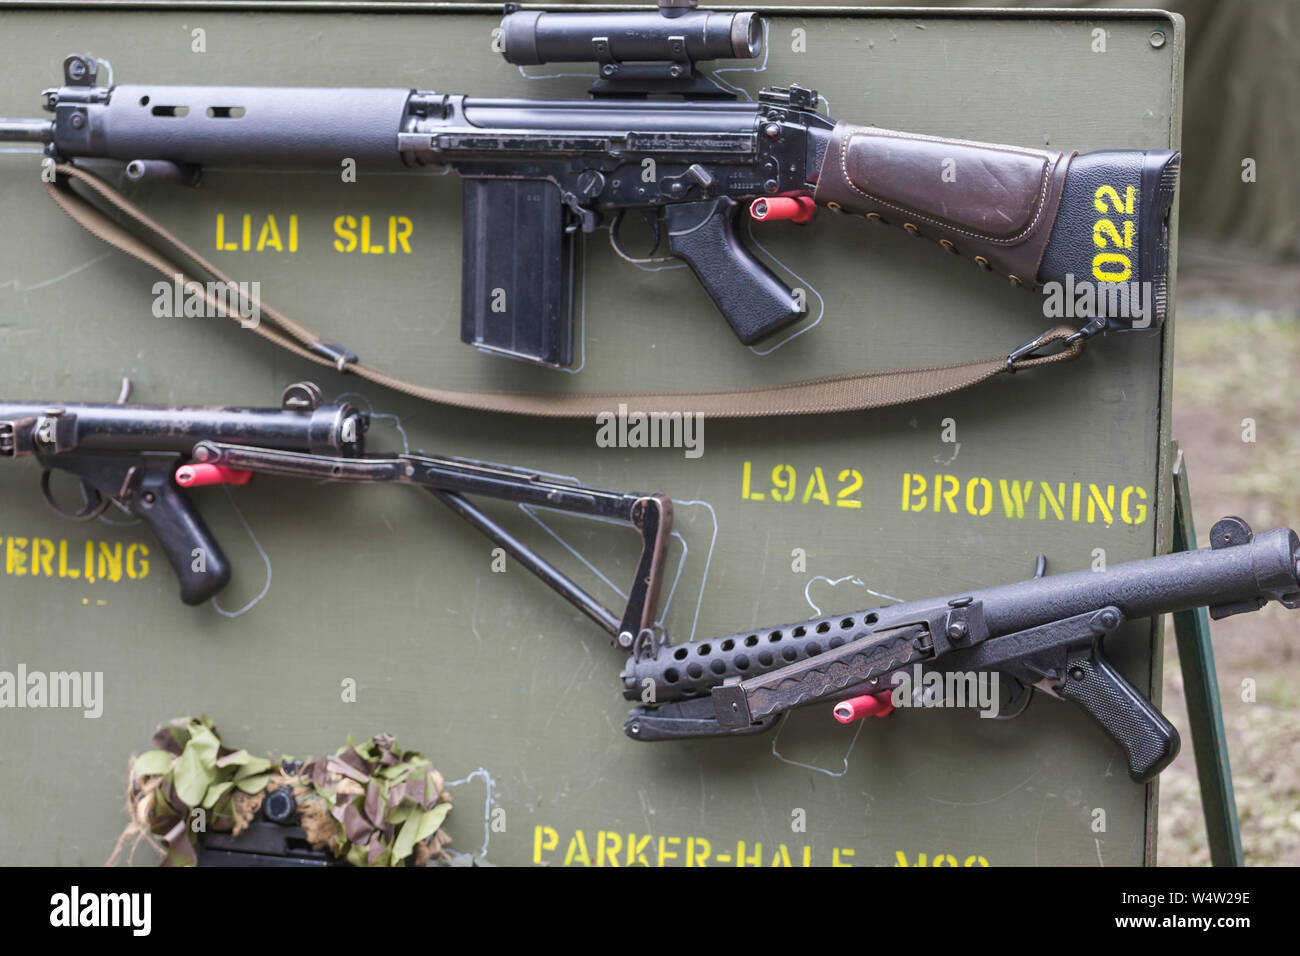 modern-rifles-on-display-at-an-outdoor-event-in-the-grounds-of-the-durham-light-infantry-museum-durham-county-durham-uk-W4W29E.jpg